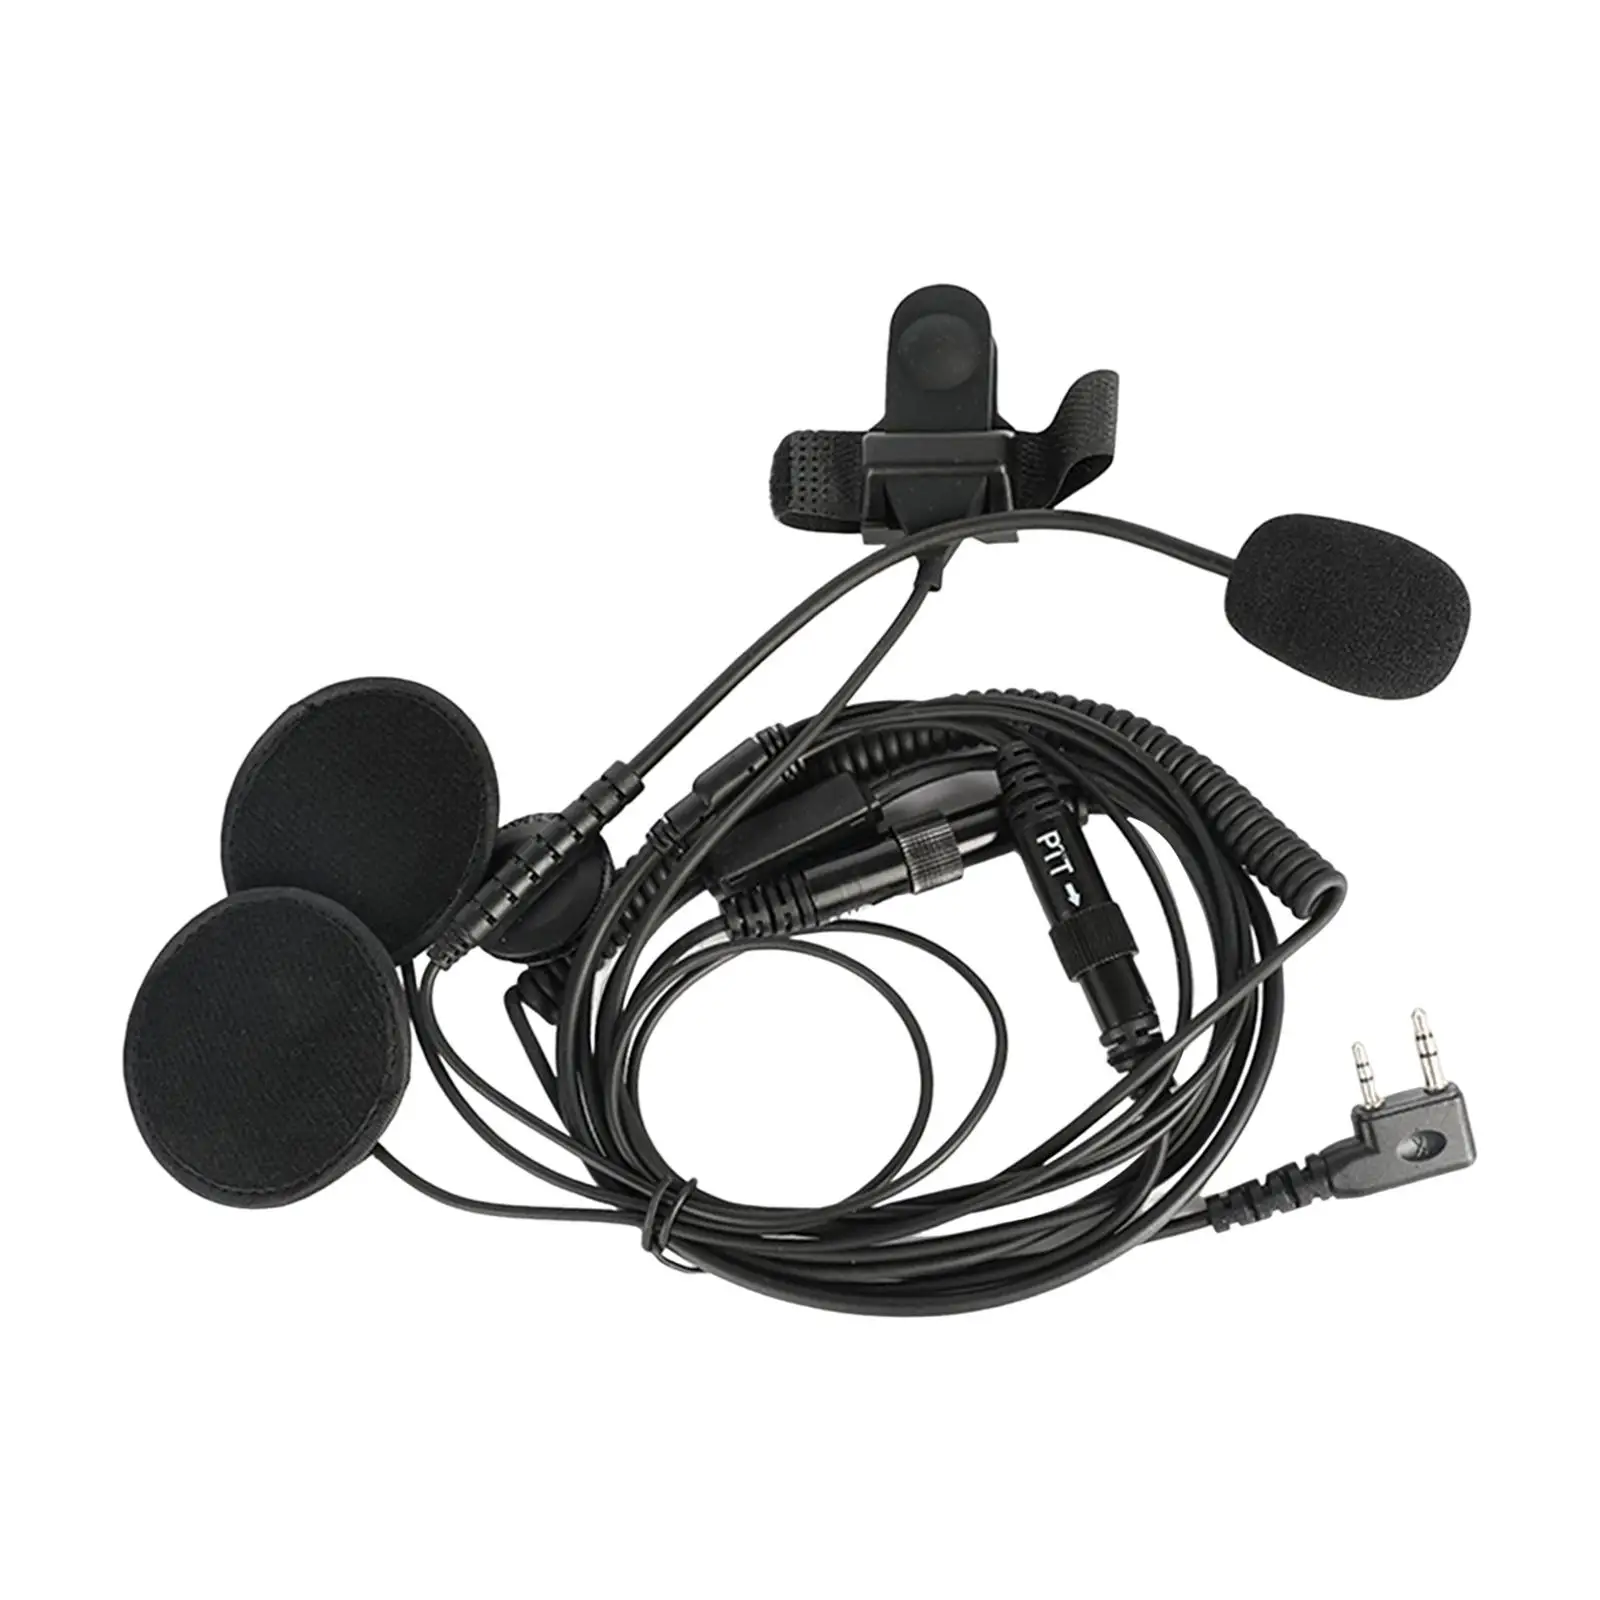 Two Way Radio Walkie Talkie Headset Earpiece with PMic Motorcycle Cap Headset for Riding Motorbike